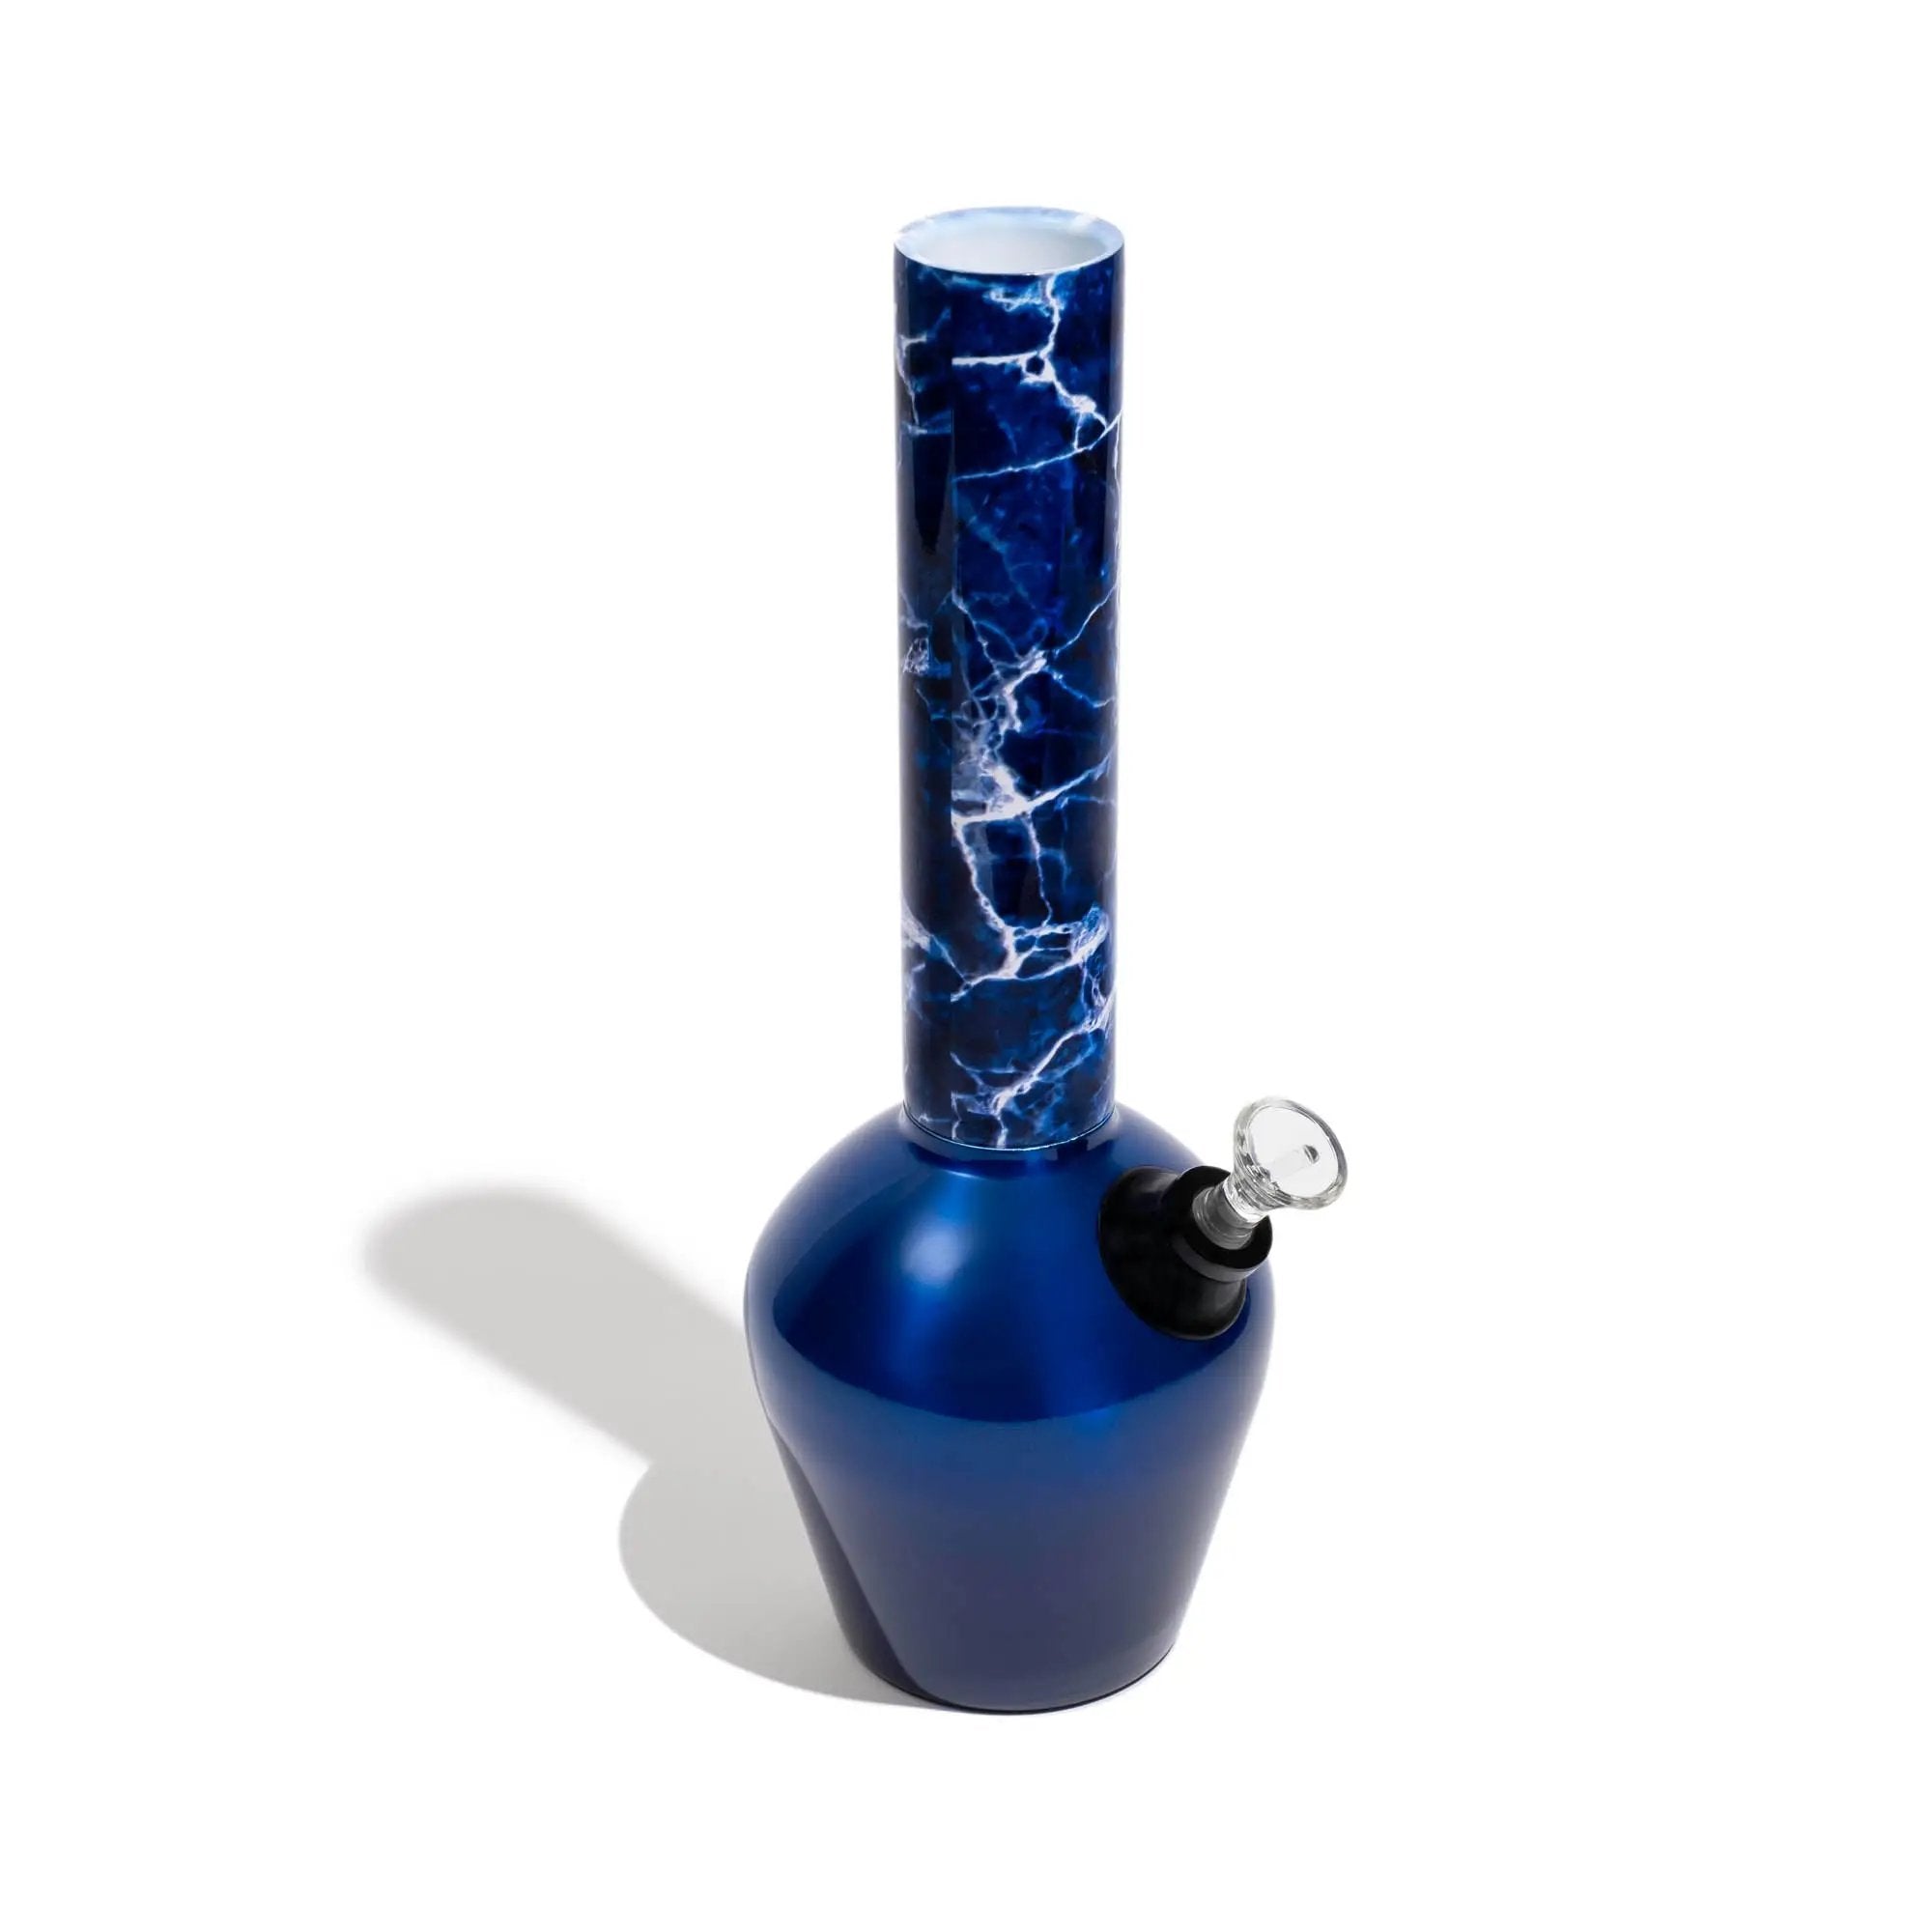 Gloss Blue & Blue Marble Combo by Chill Steel Pipes